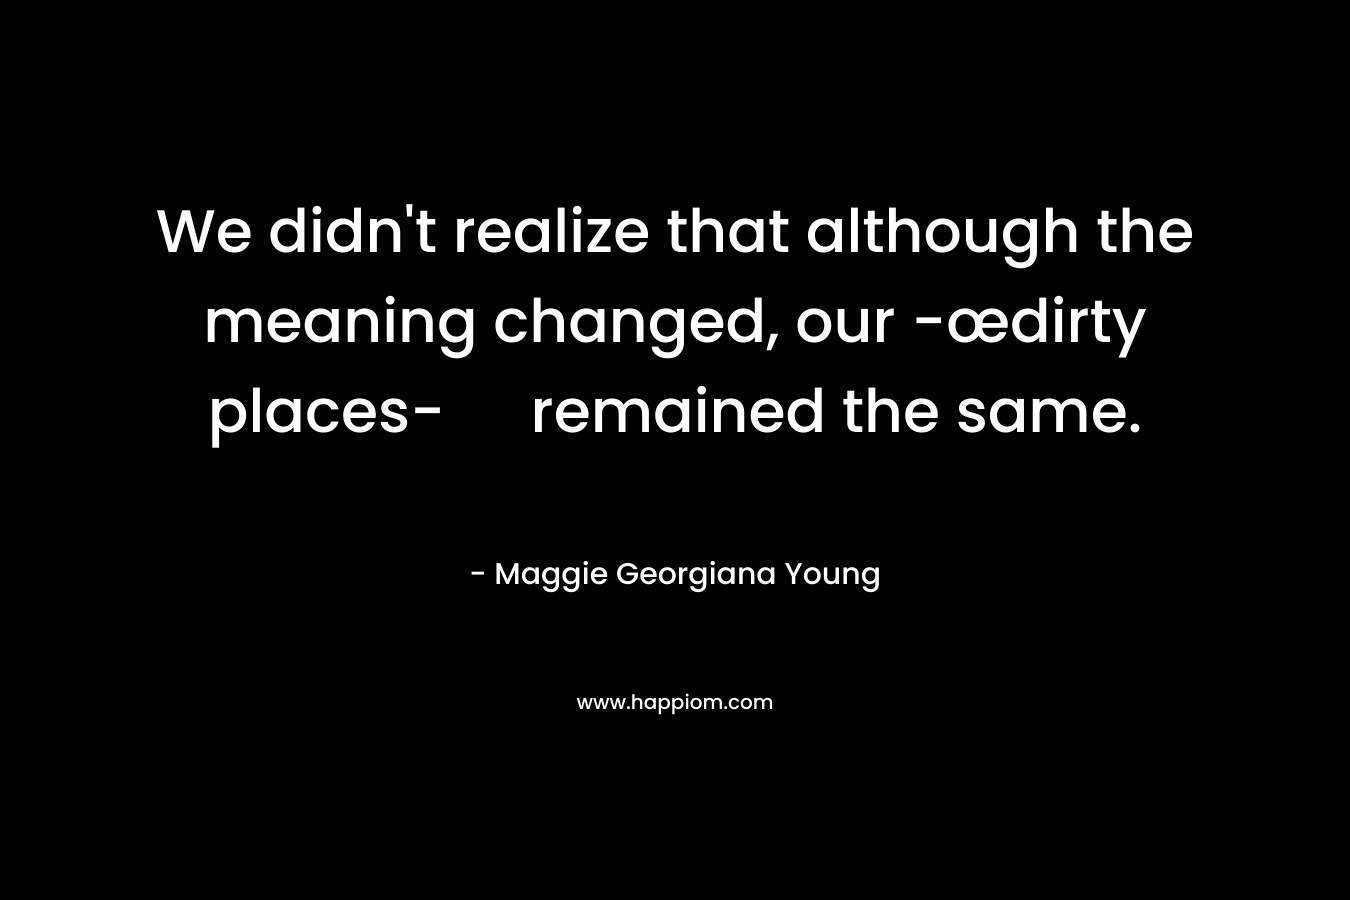 We didn’t realize that although the meaning changed, our -œdirty places- remained the same. – Maggie Georgiana Young